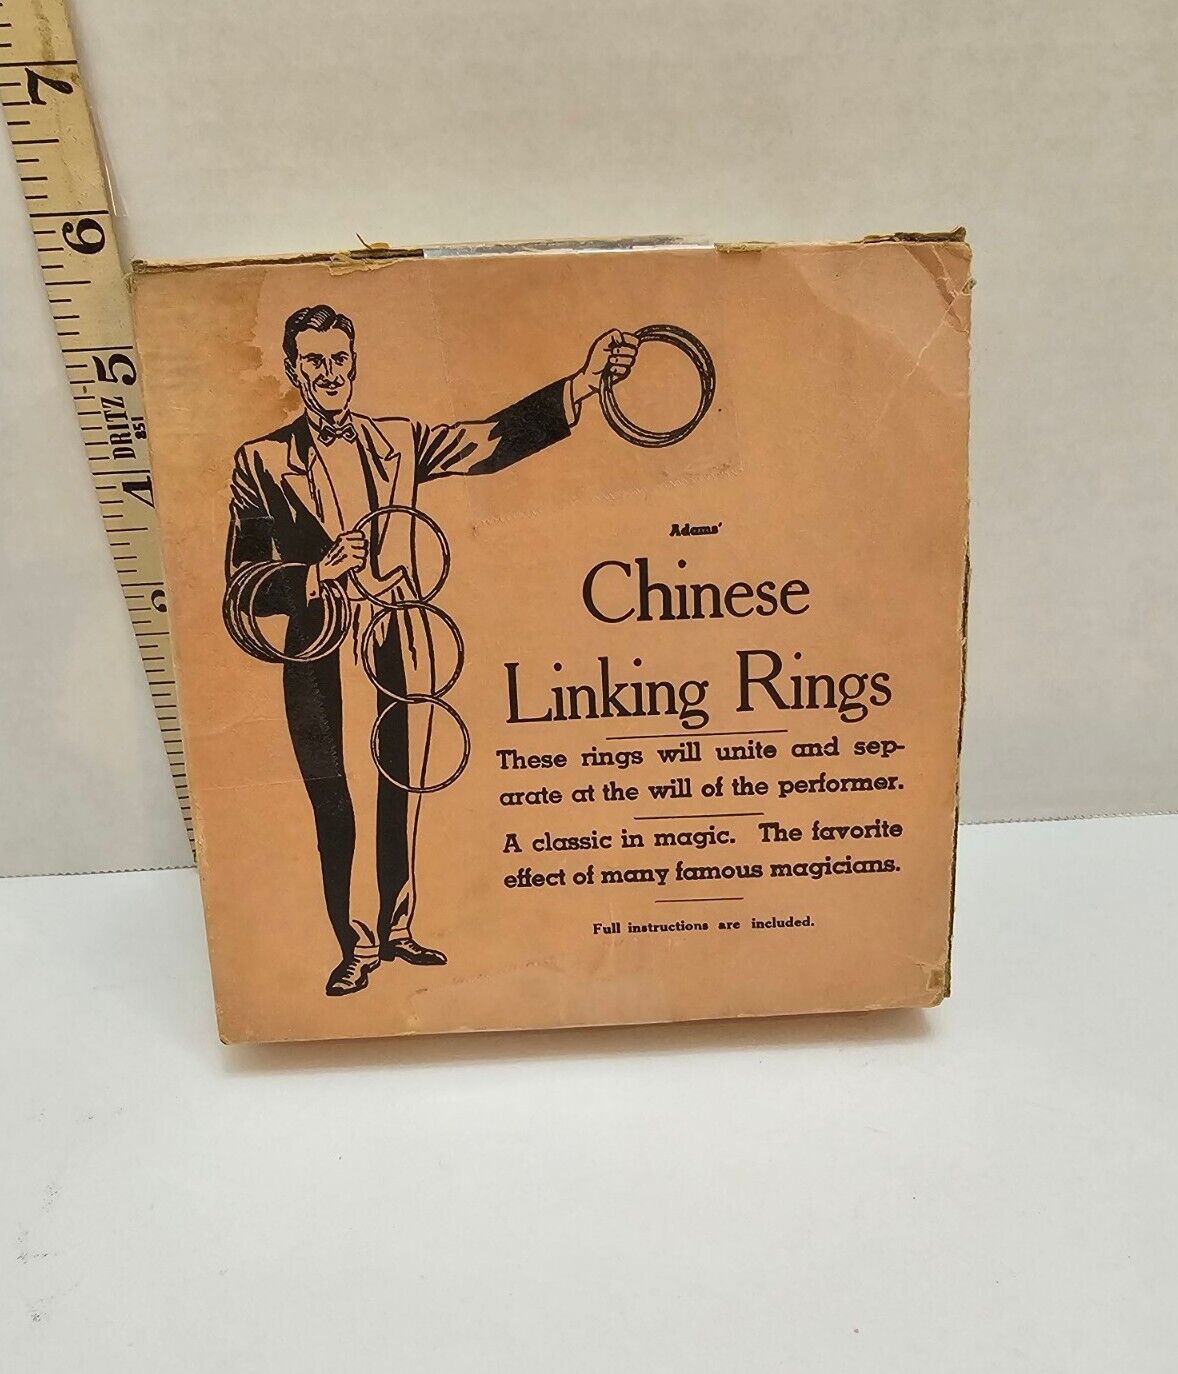 Vintage 1960s? Adams Chinese Linking Rings. With Box and Instructions